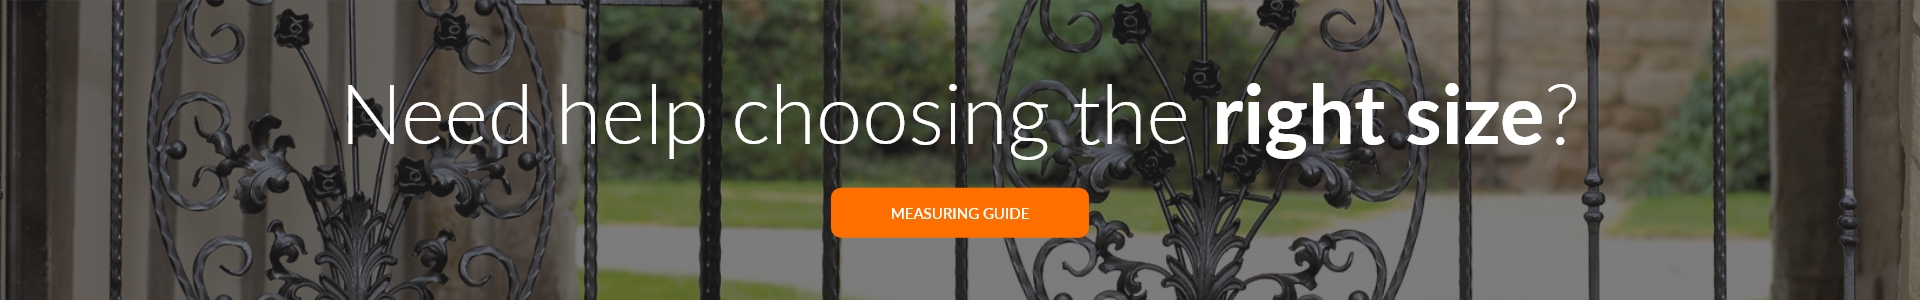 View the metal railoing measuring guide